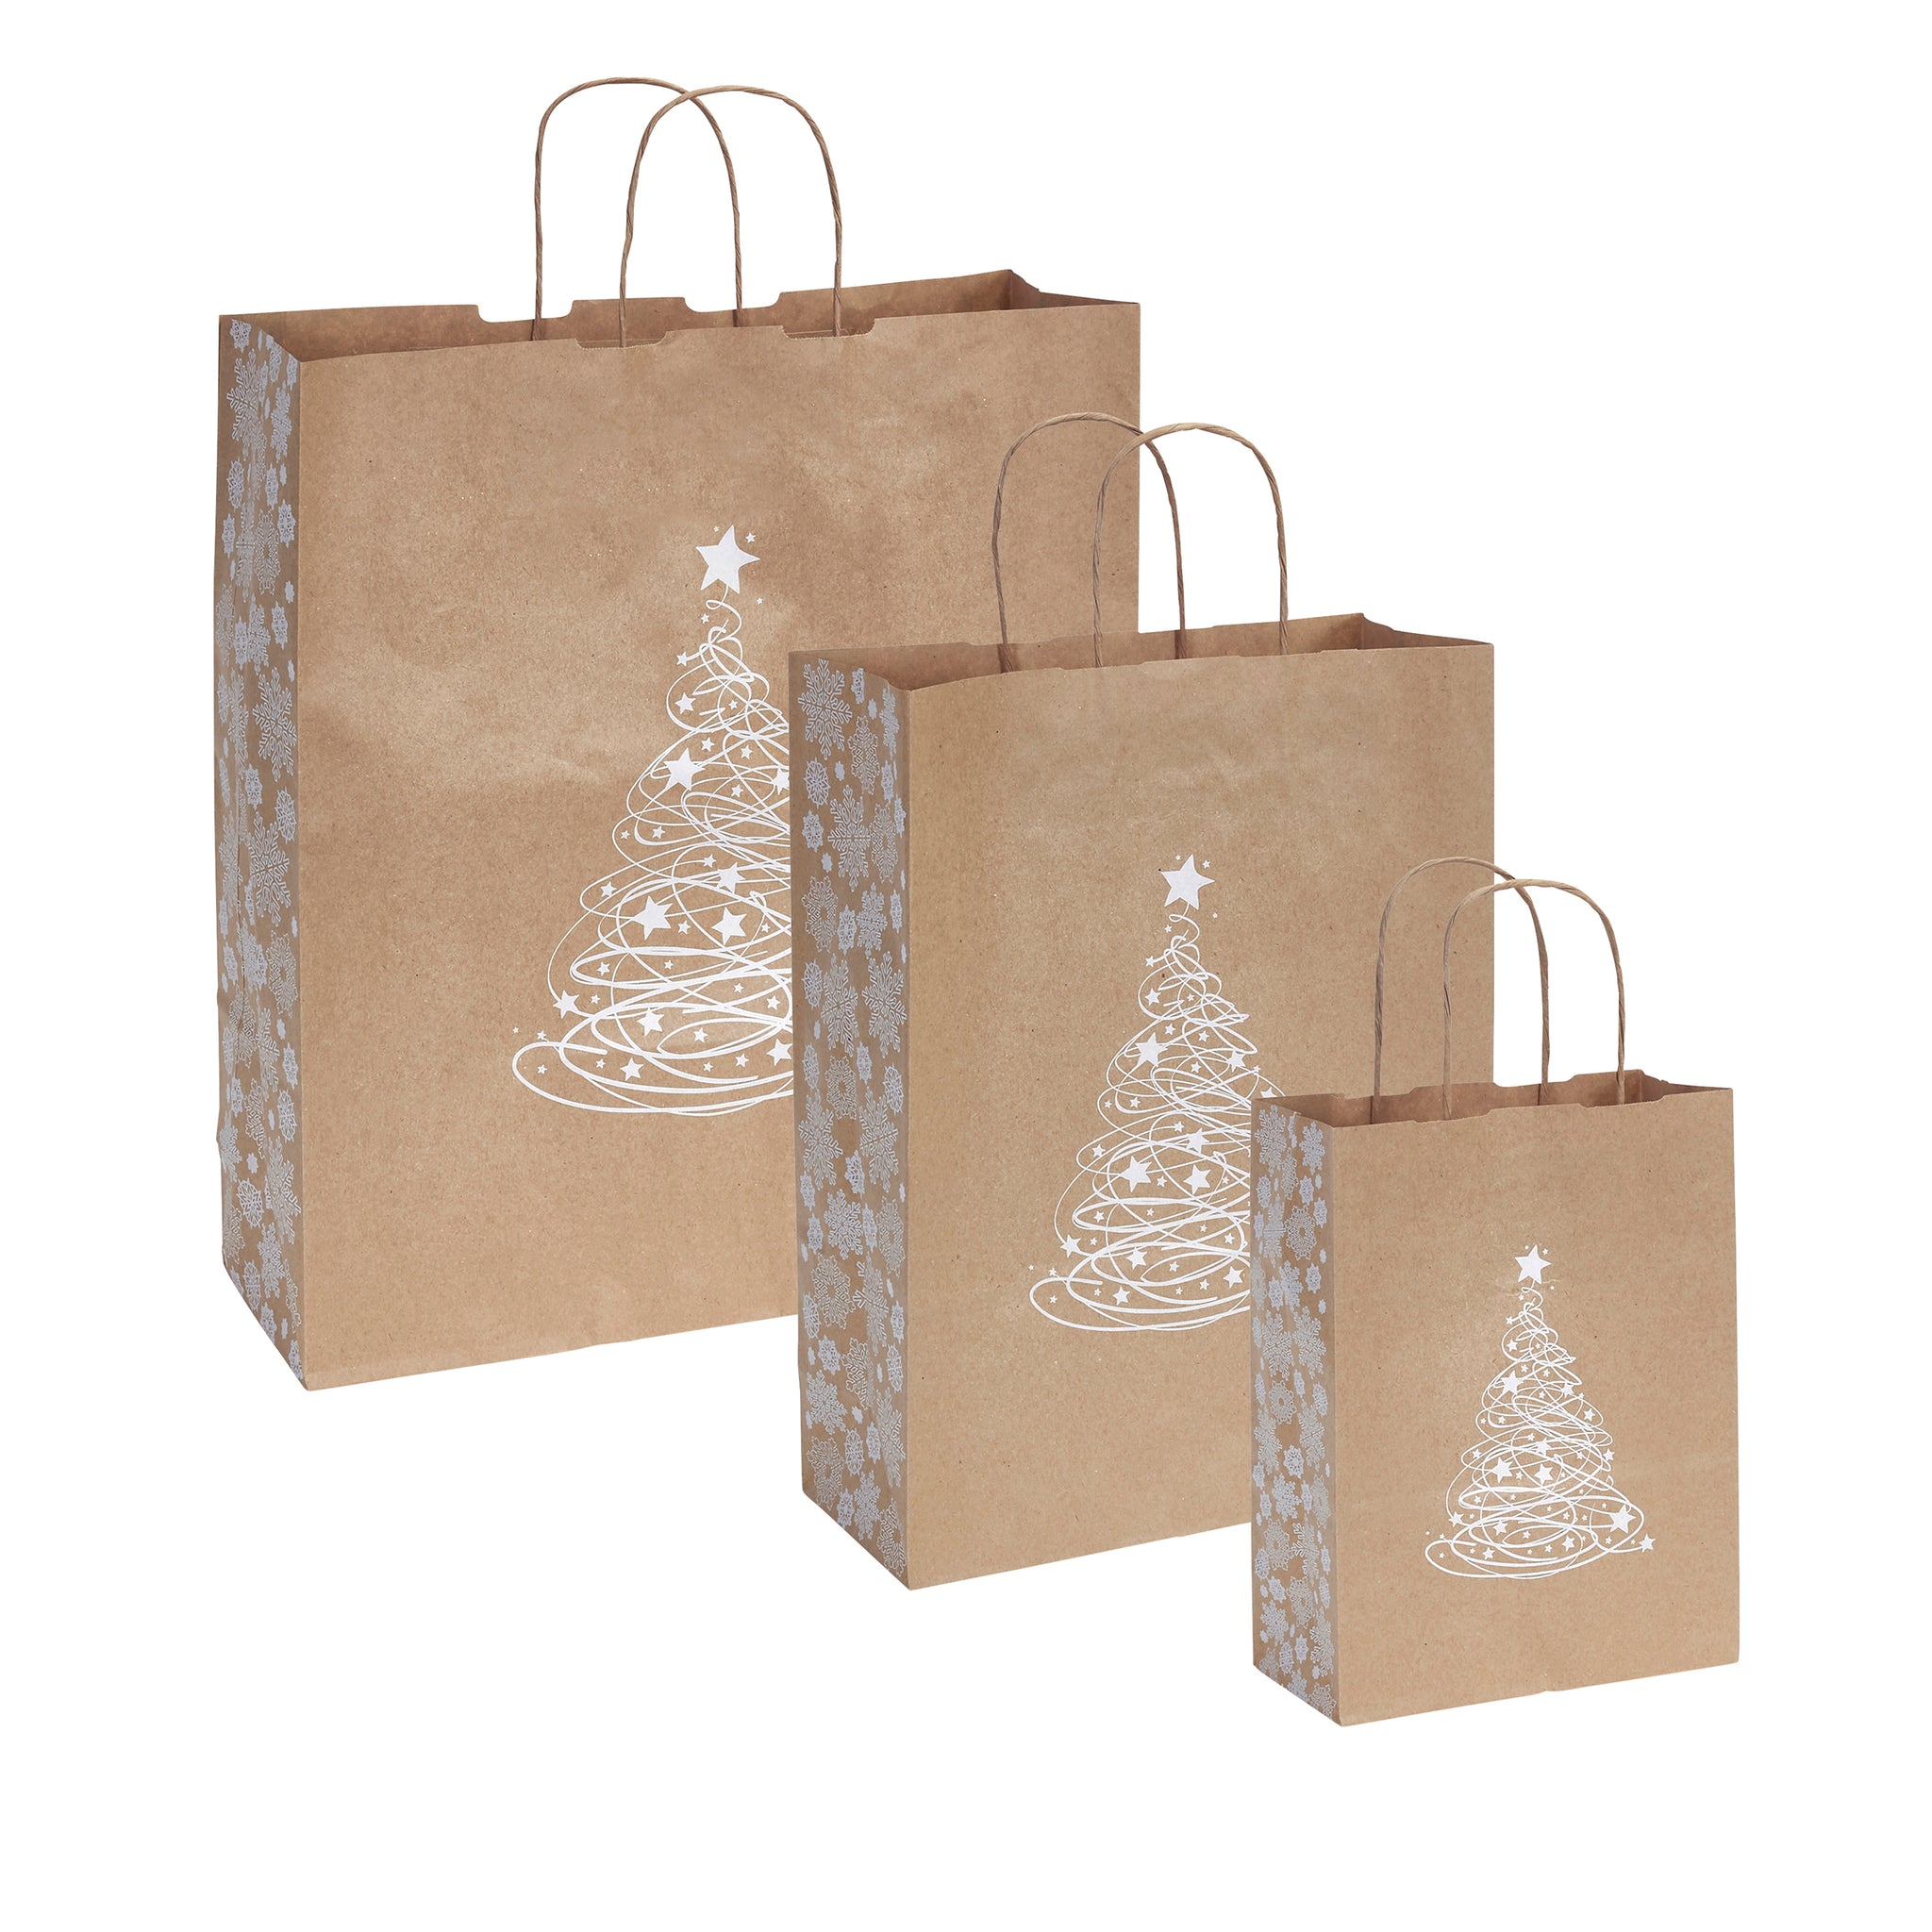 Pack of 10 Christmas Gift Bags - Christmas Tree Design Twisted Handle